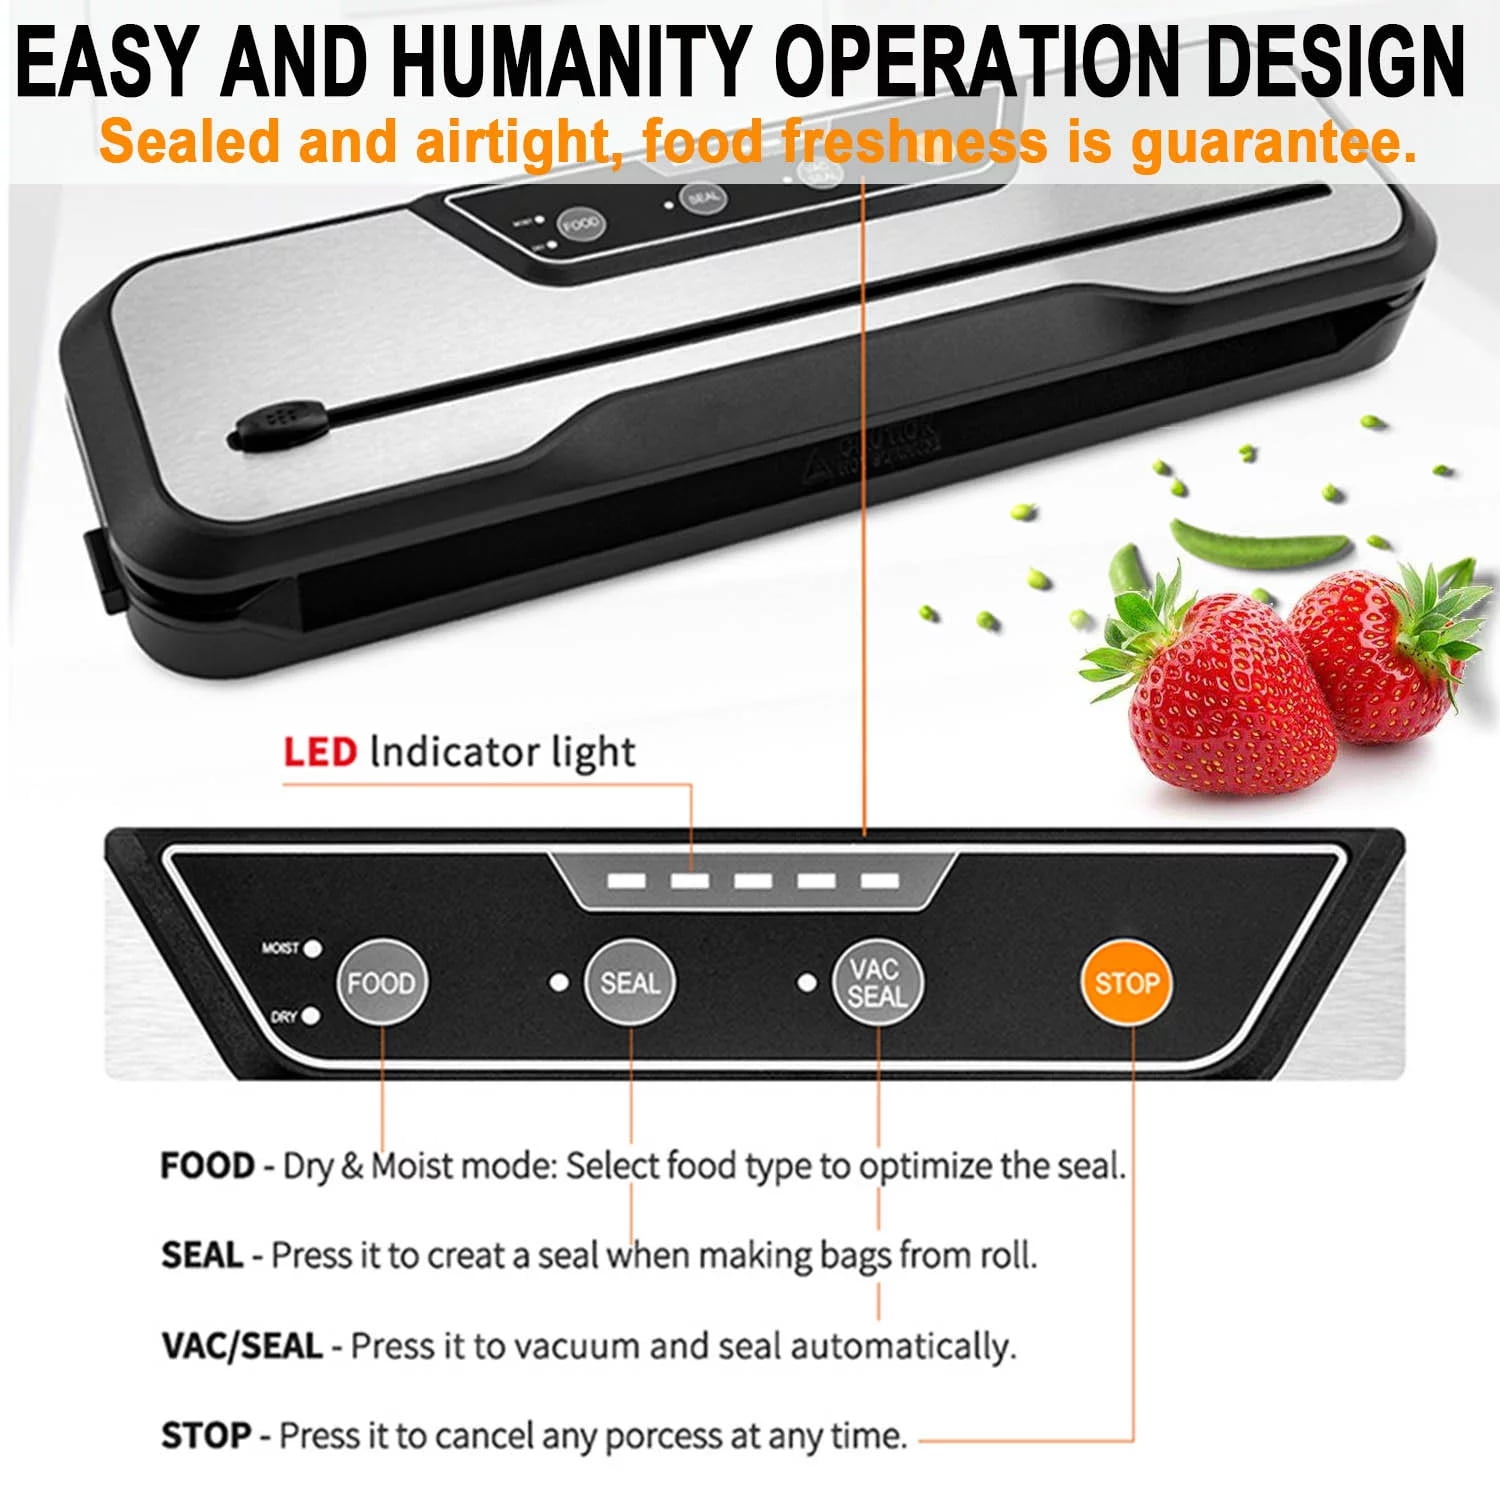 HAUXHEL Vacuum Sealer Machine Automatic Vacuum System for Food Savers Food  Sealer with Built-in Cutter Dry/Moist Food Modes Touch Screen Control，Safe  Design 